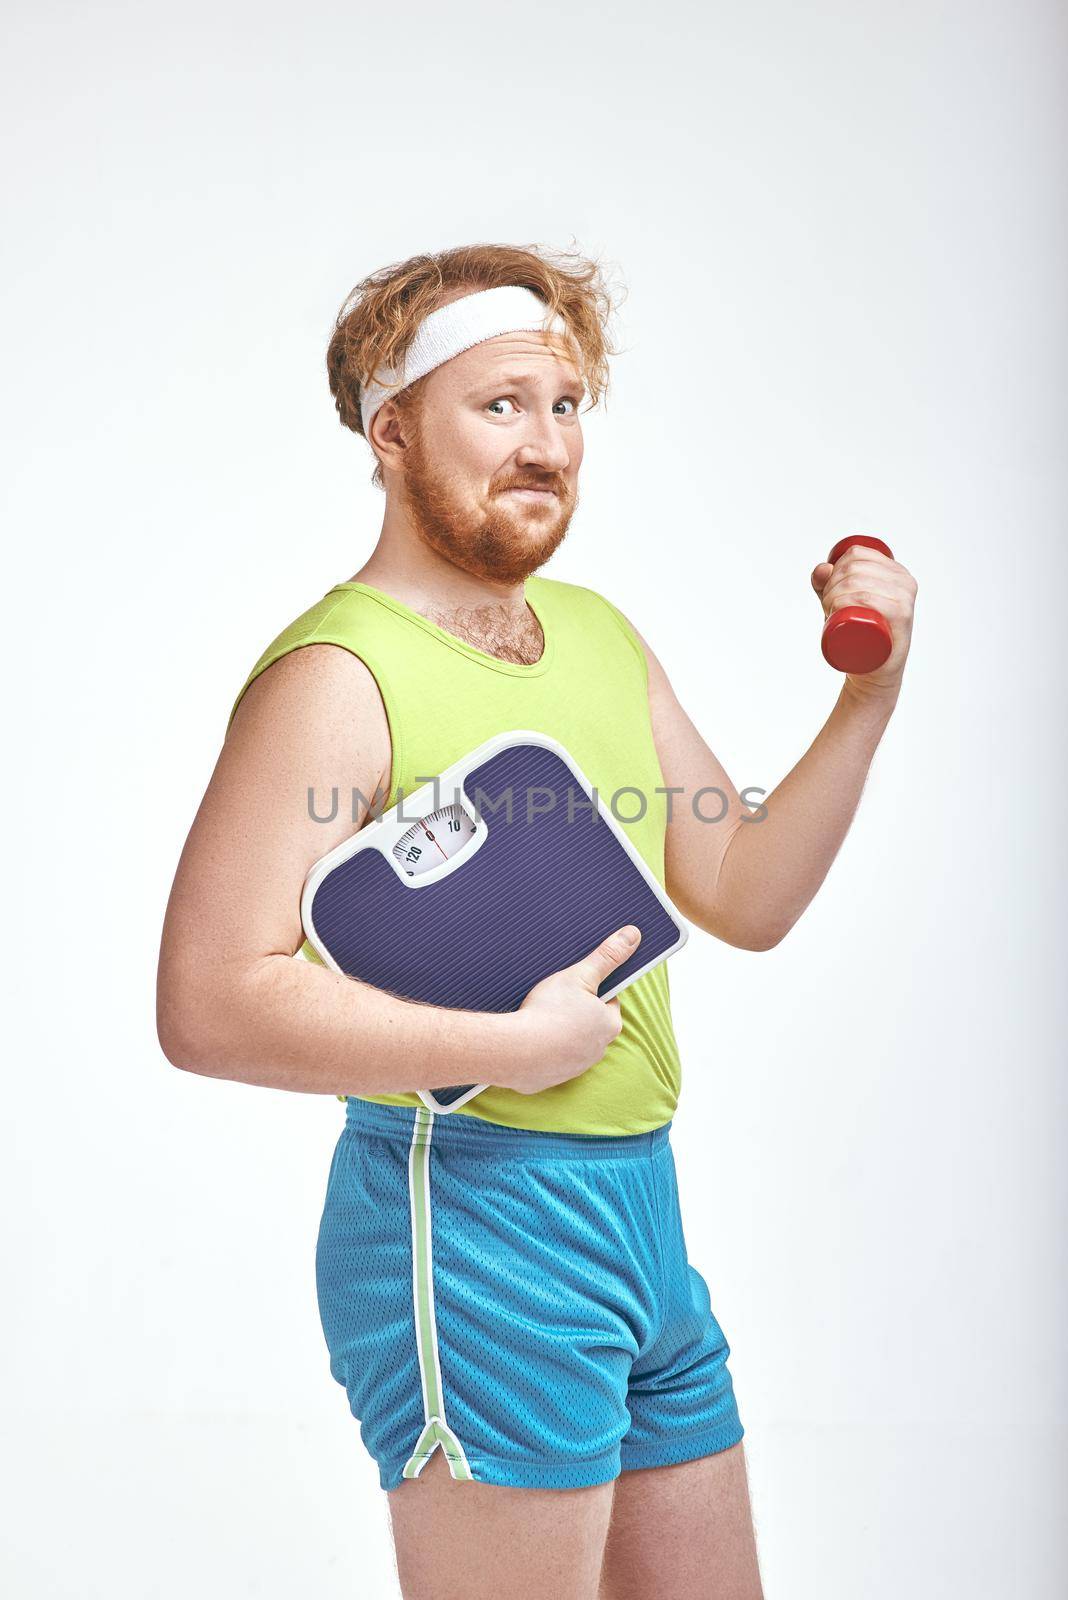 Funny red haired, bearded, plump man is holding a dumbbell and scales by friendsstock